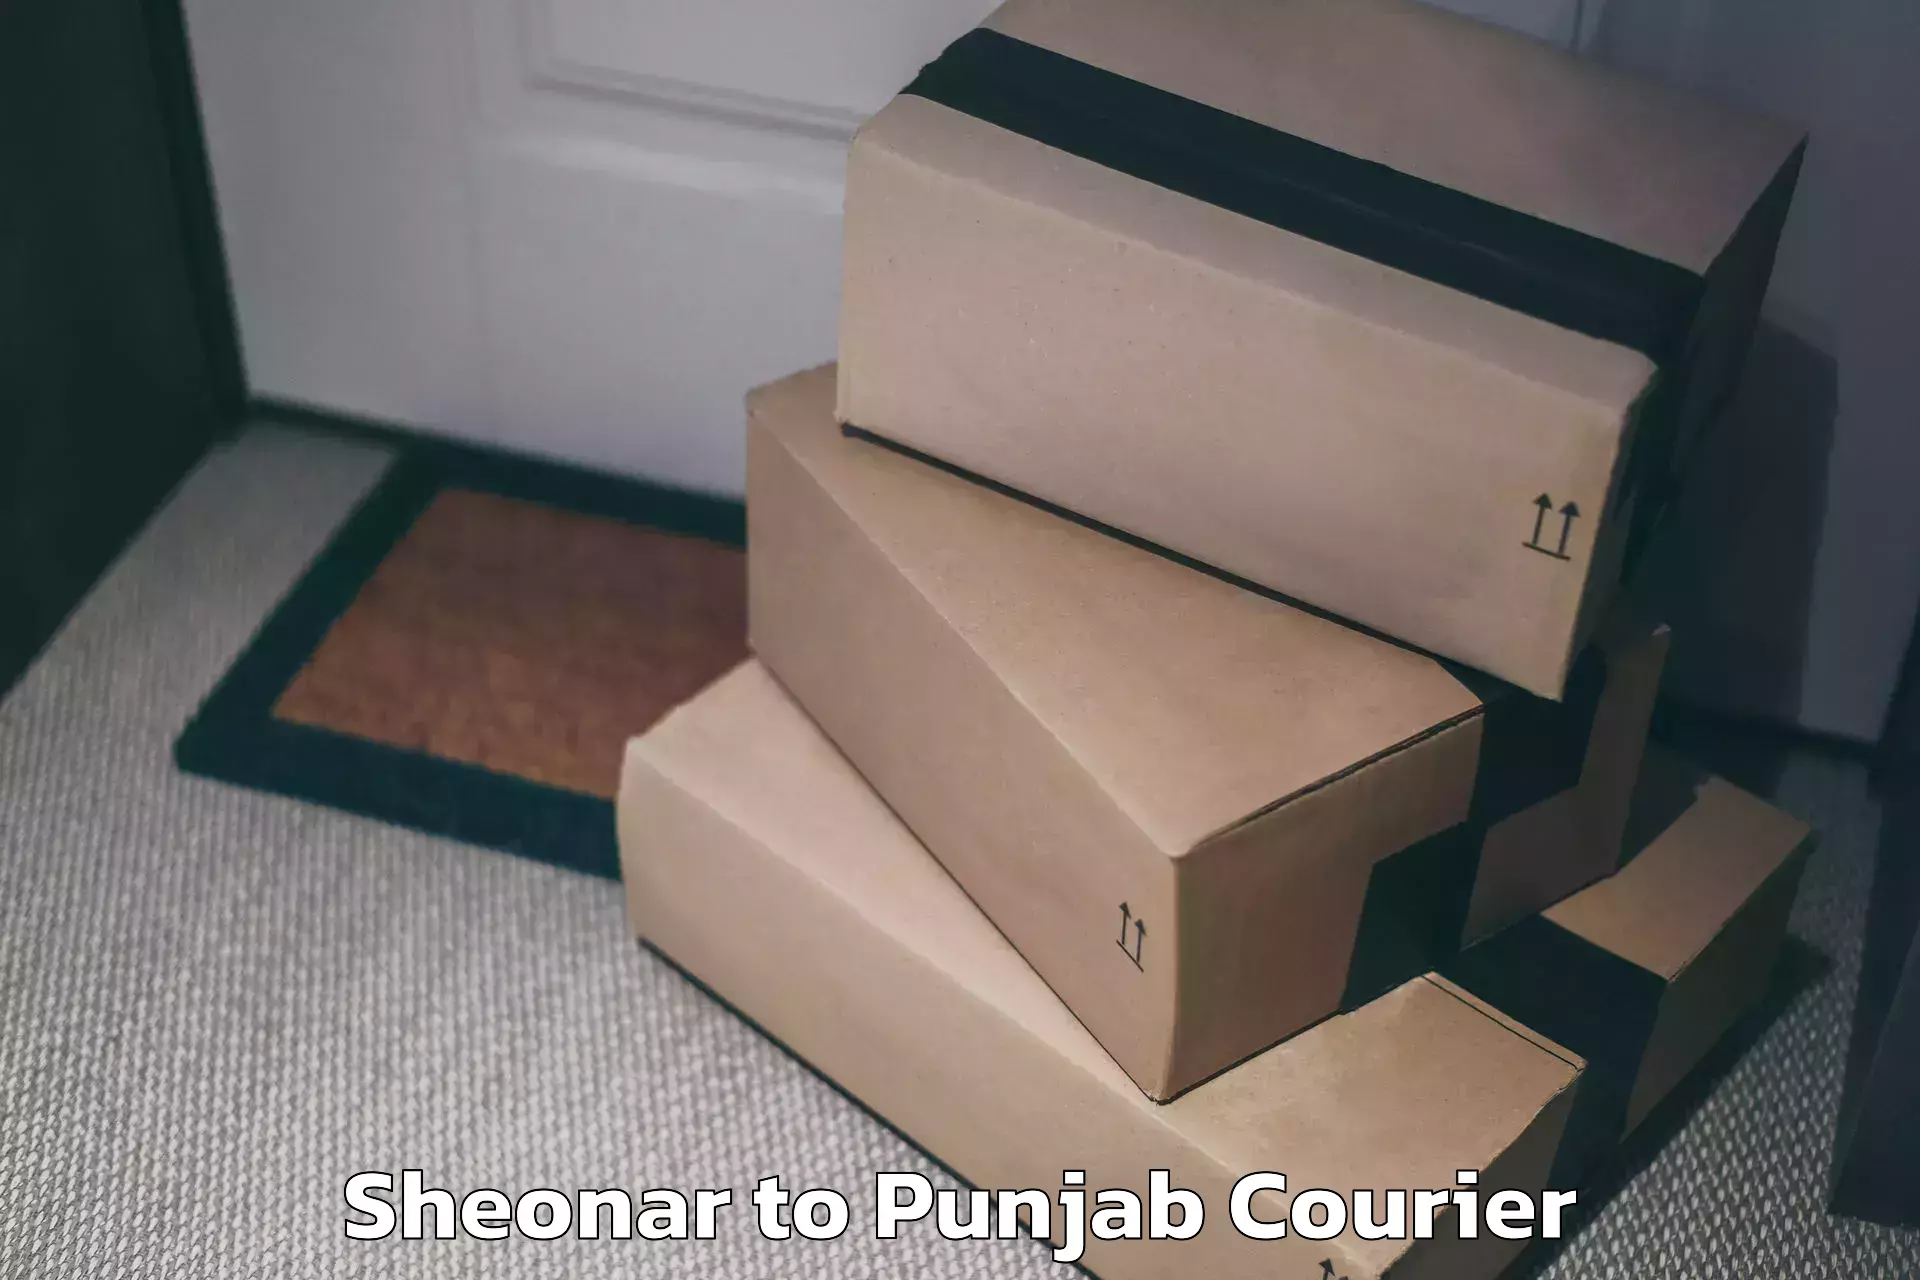 Express luggage delivery Sheonar to Mohali